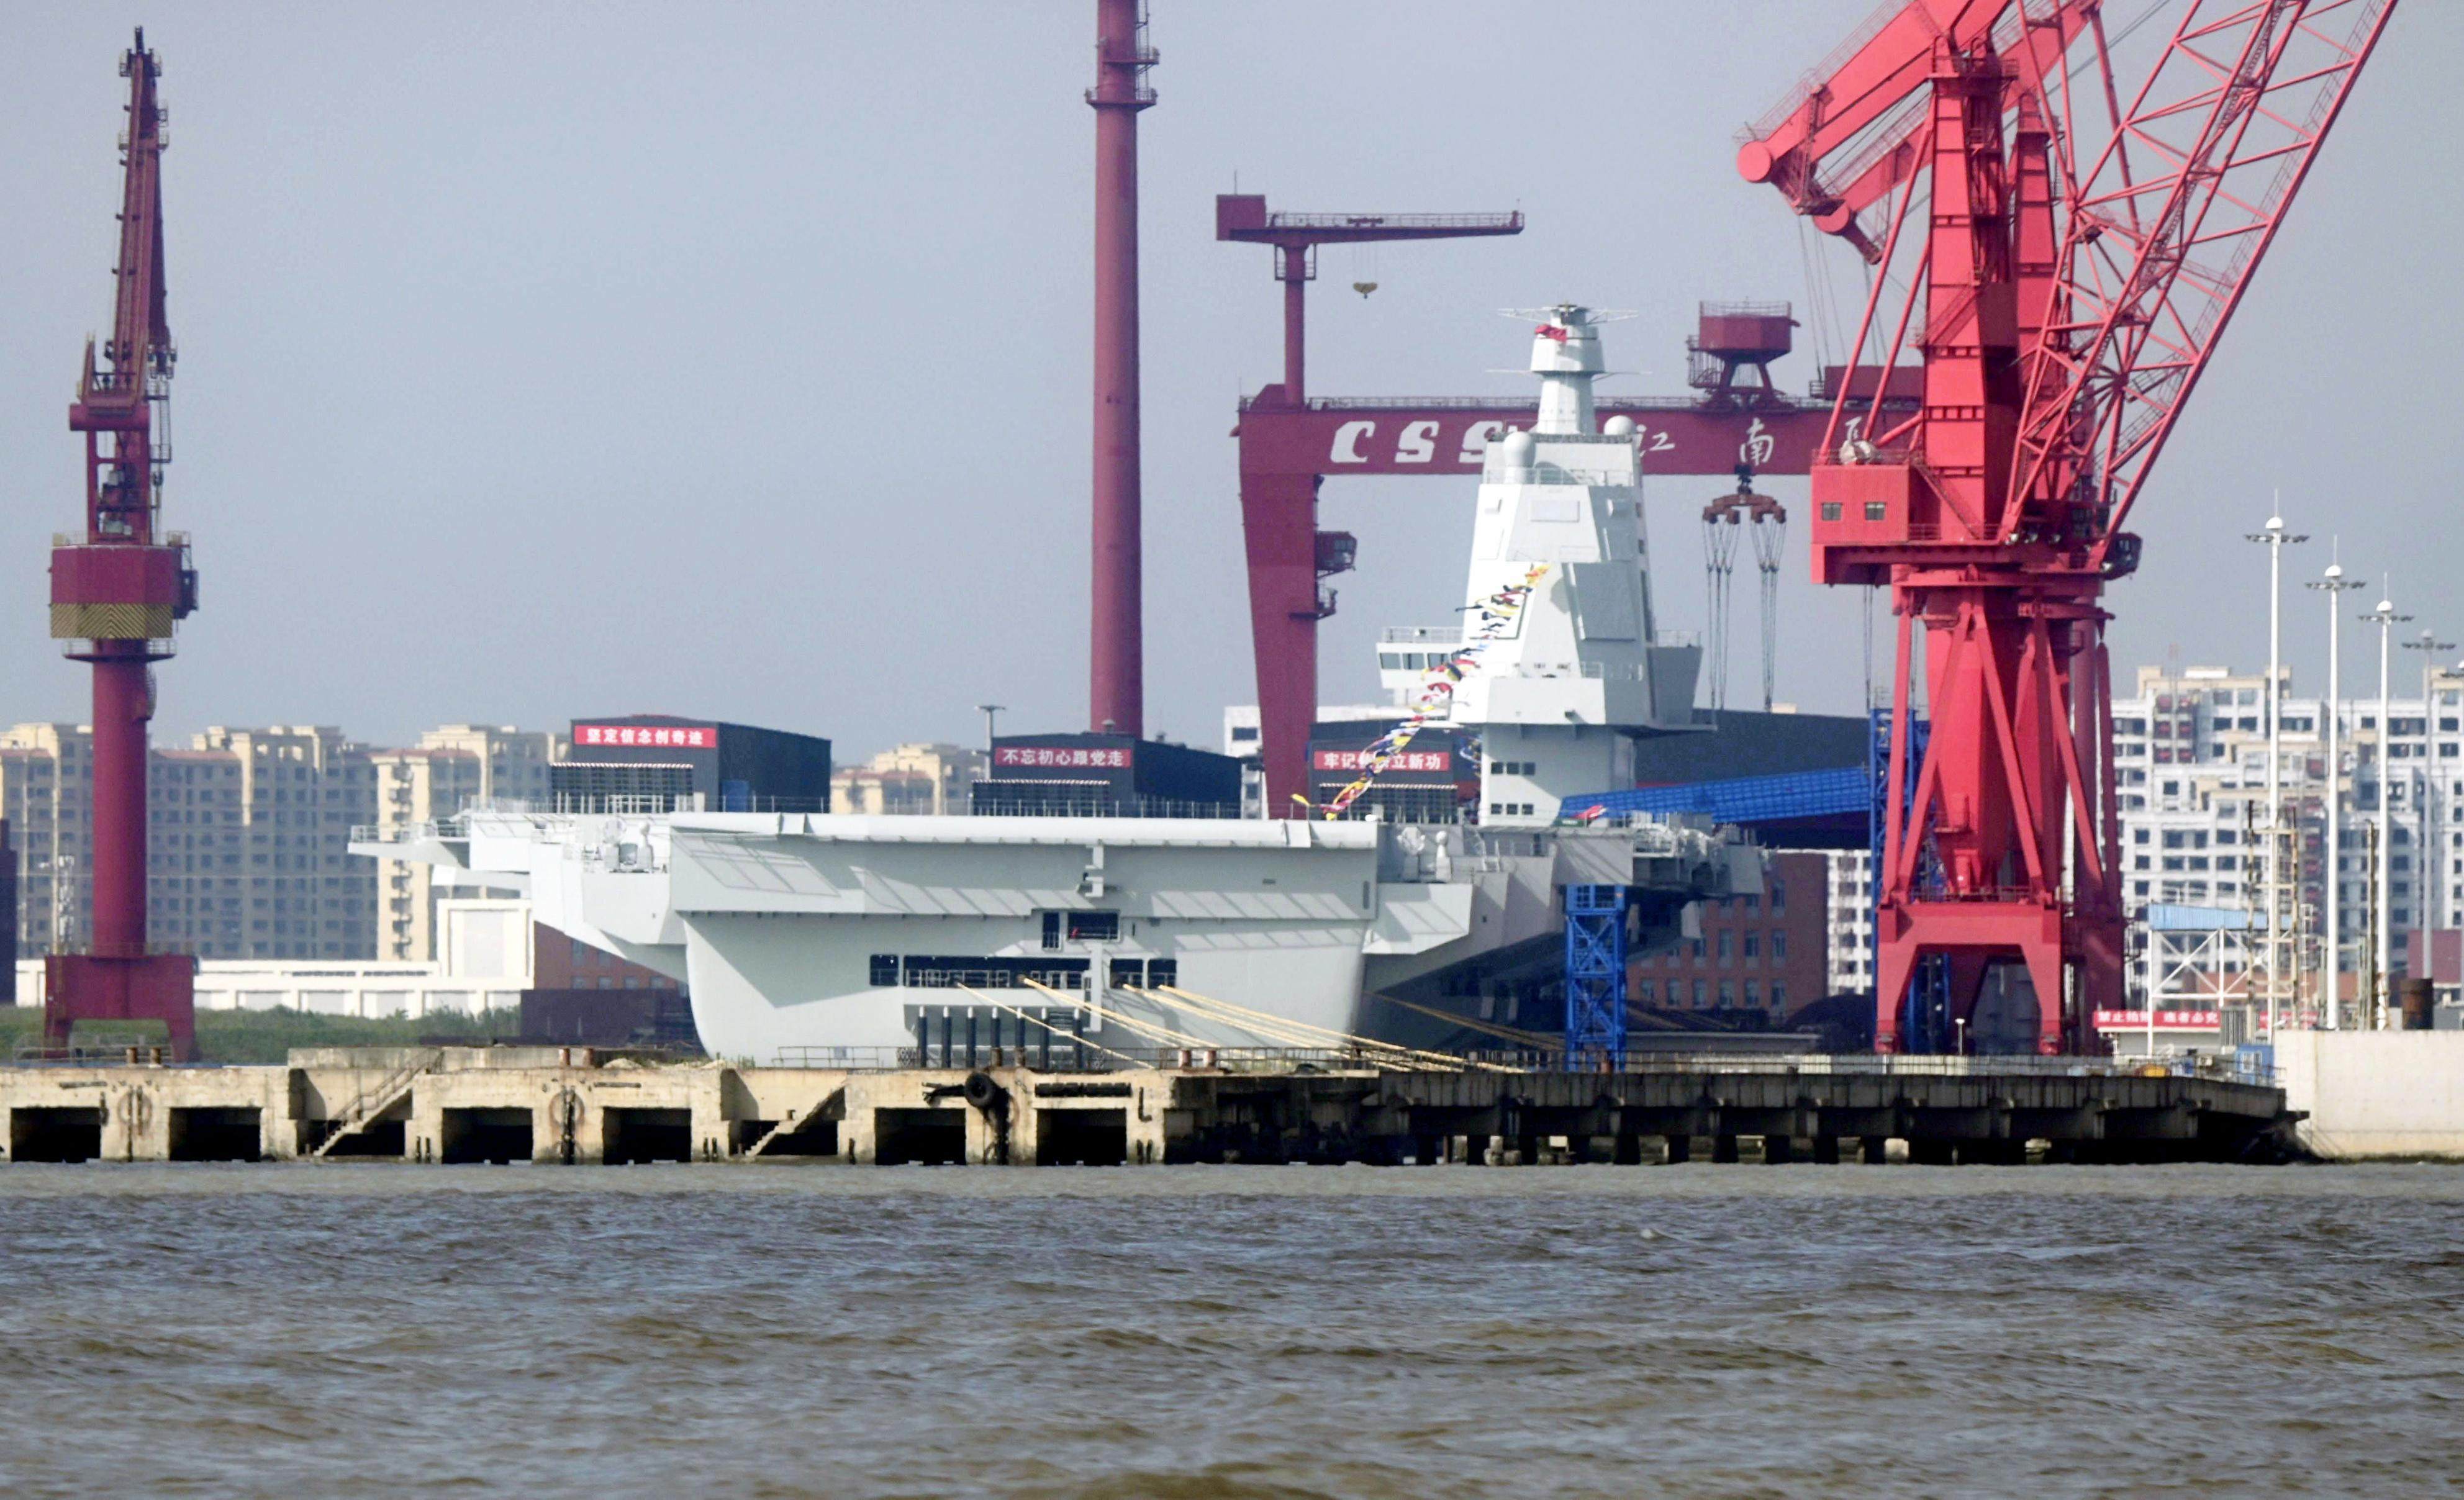 The Fujian is China’s third aircraft carrier, and the first to be equipped with advanced launch technology comparable to its US counterparts. Photo: Kyodo